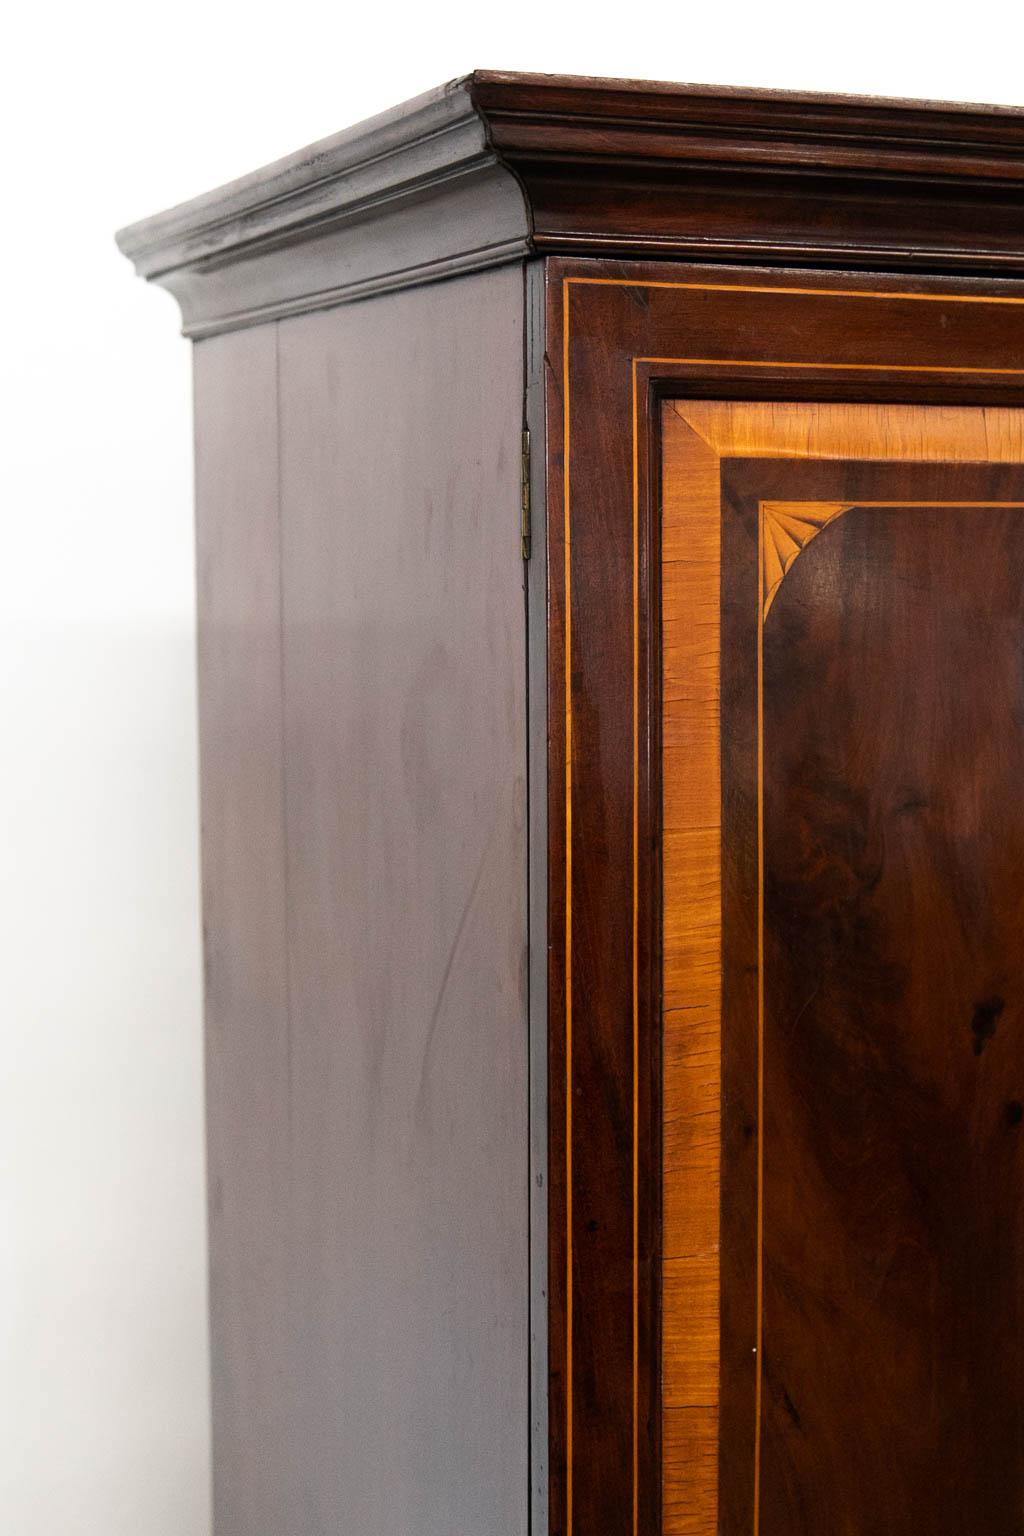 The doors of this linen press have beveled raised panels framed with one inch bee's wing satinwood with boxwood inlay framing quarter fans and a central oval satinwood and boxwood fan. The doors are also inlaid with double boxwood lines. The drawers